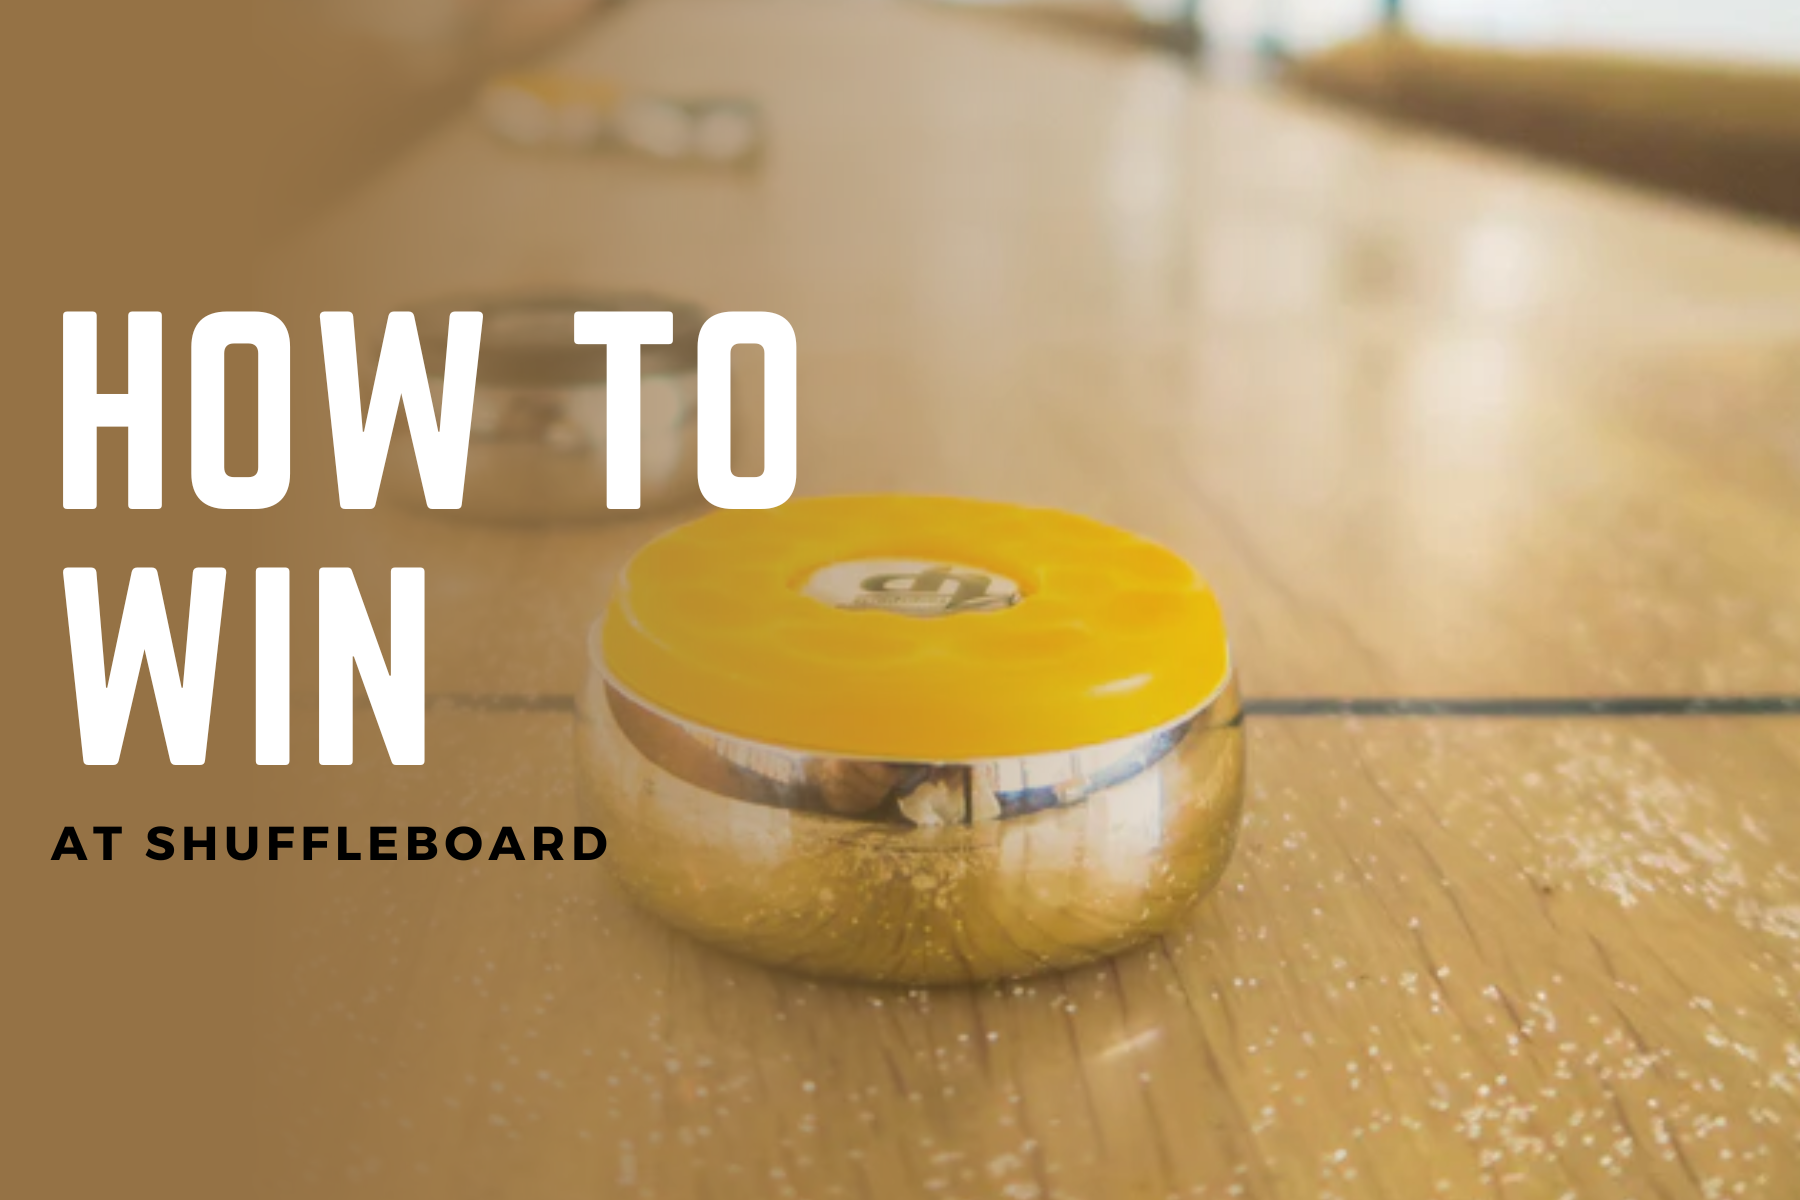 How To Win At Shuffleboard - Expert Tips For Securing Victory